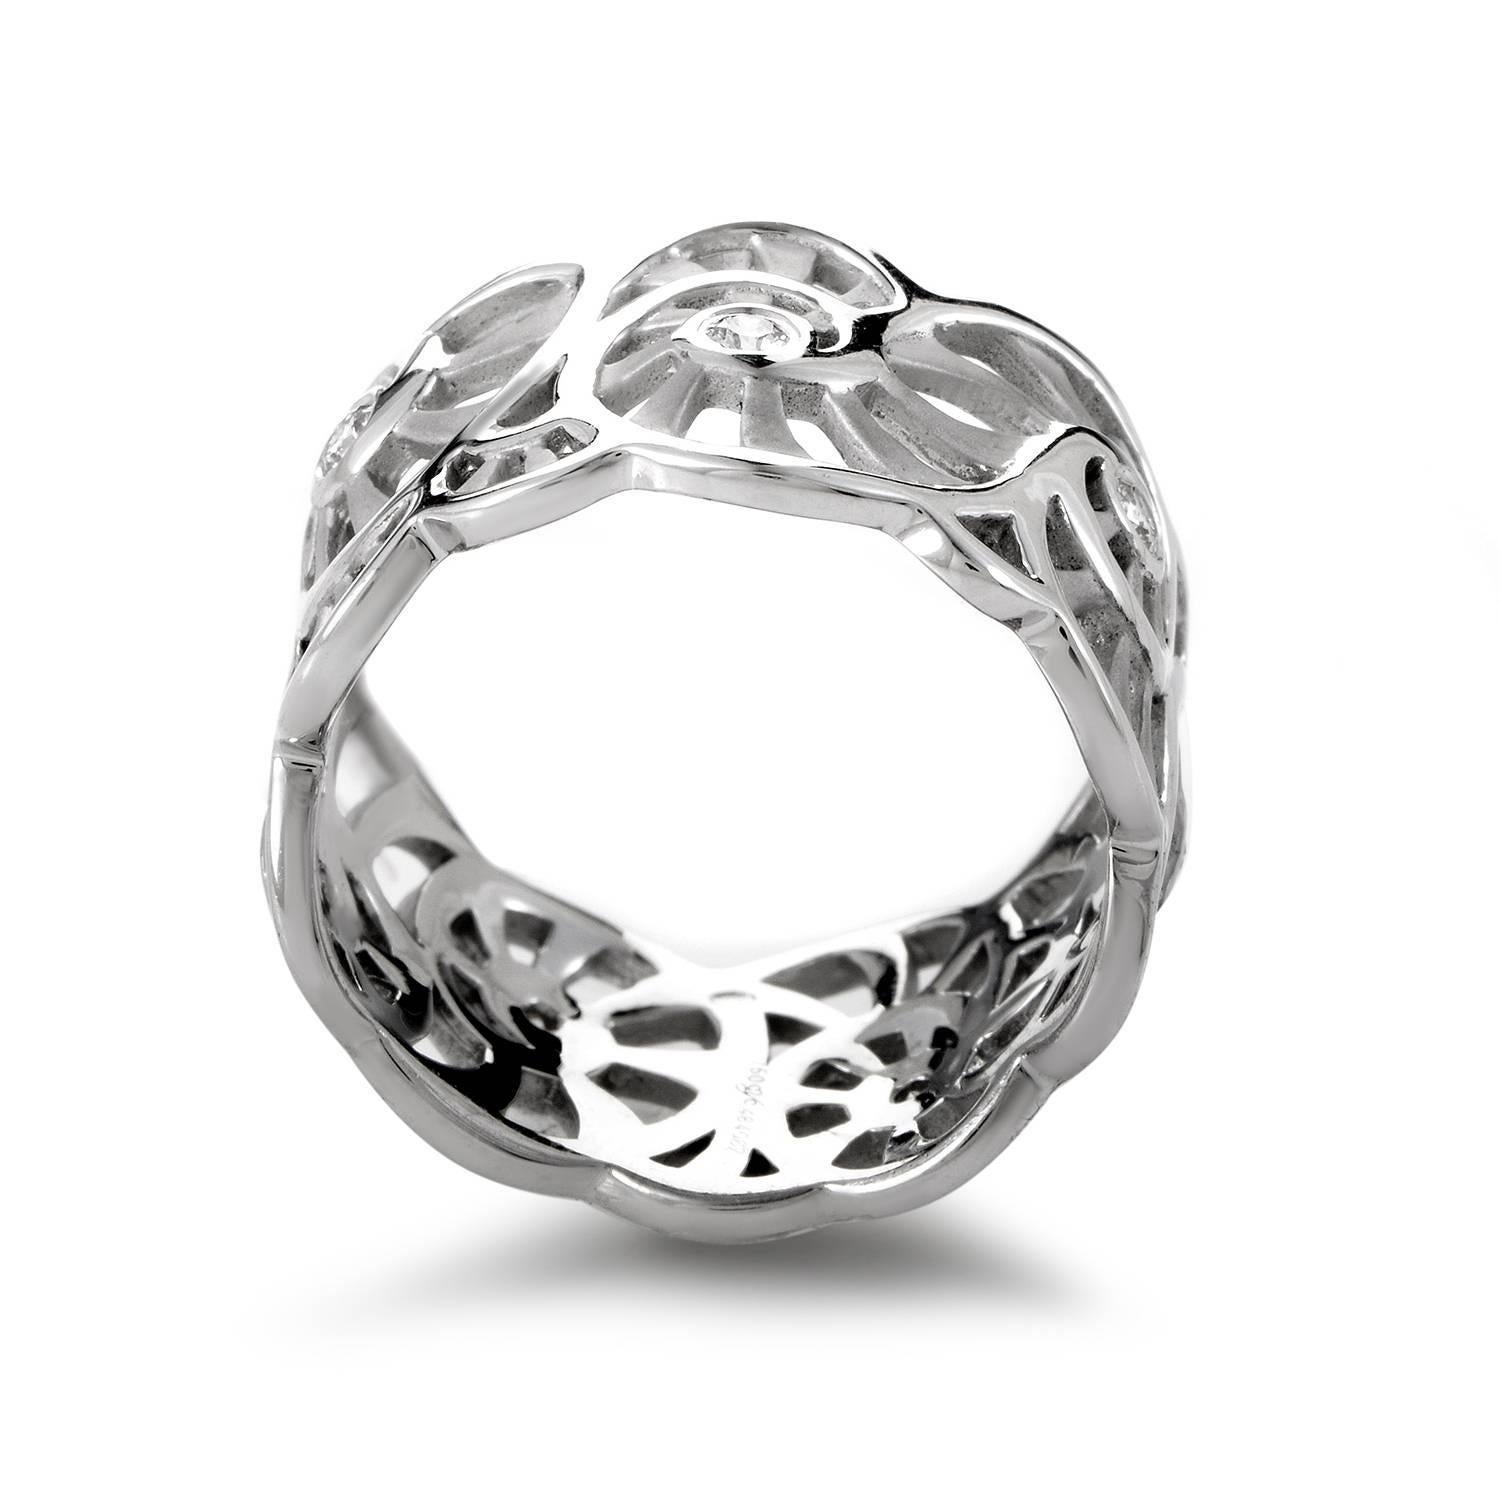 Carrera y Carrera hints toward a filigree style, then executes a pattern of precious metal that exudes the charm of oceanic antiquity. The 18K White Gold is shaped into a seashell motif that is repeated with care and precision across the band's